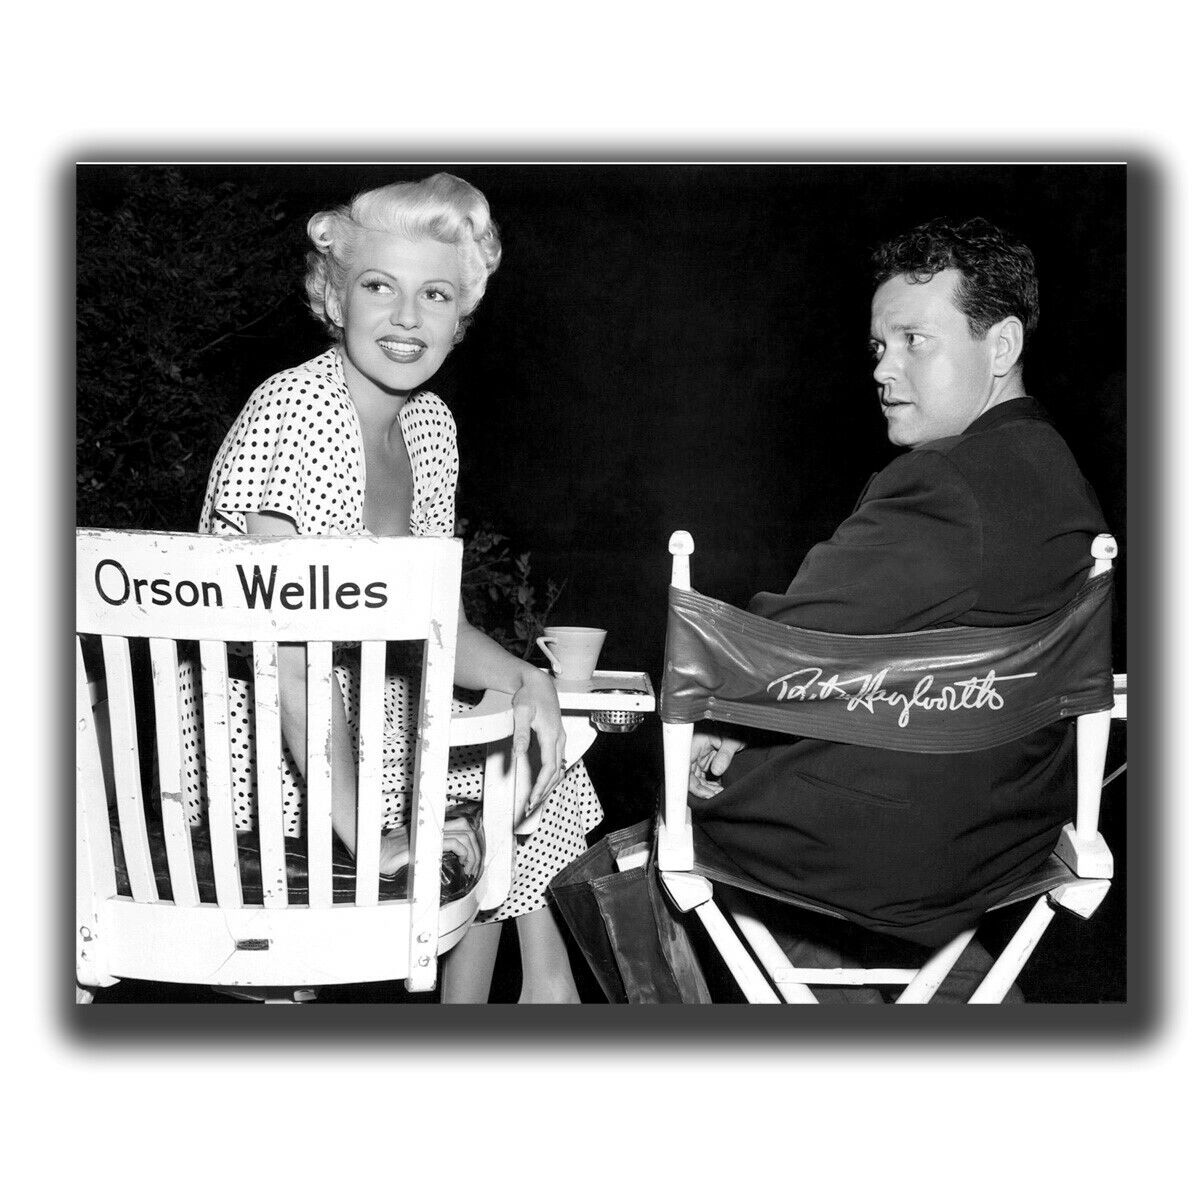 Orson Wells and Rita Hayworth Celebrities Vintage Photo Glossy Size 8X10in A073 